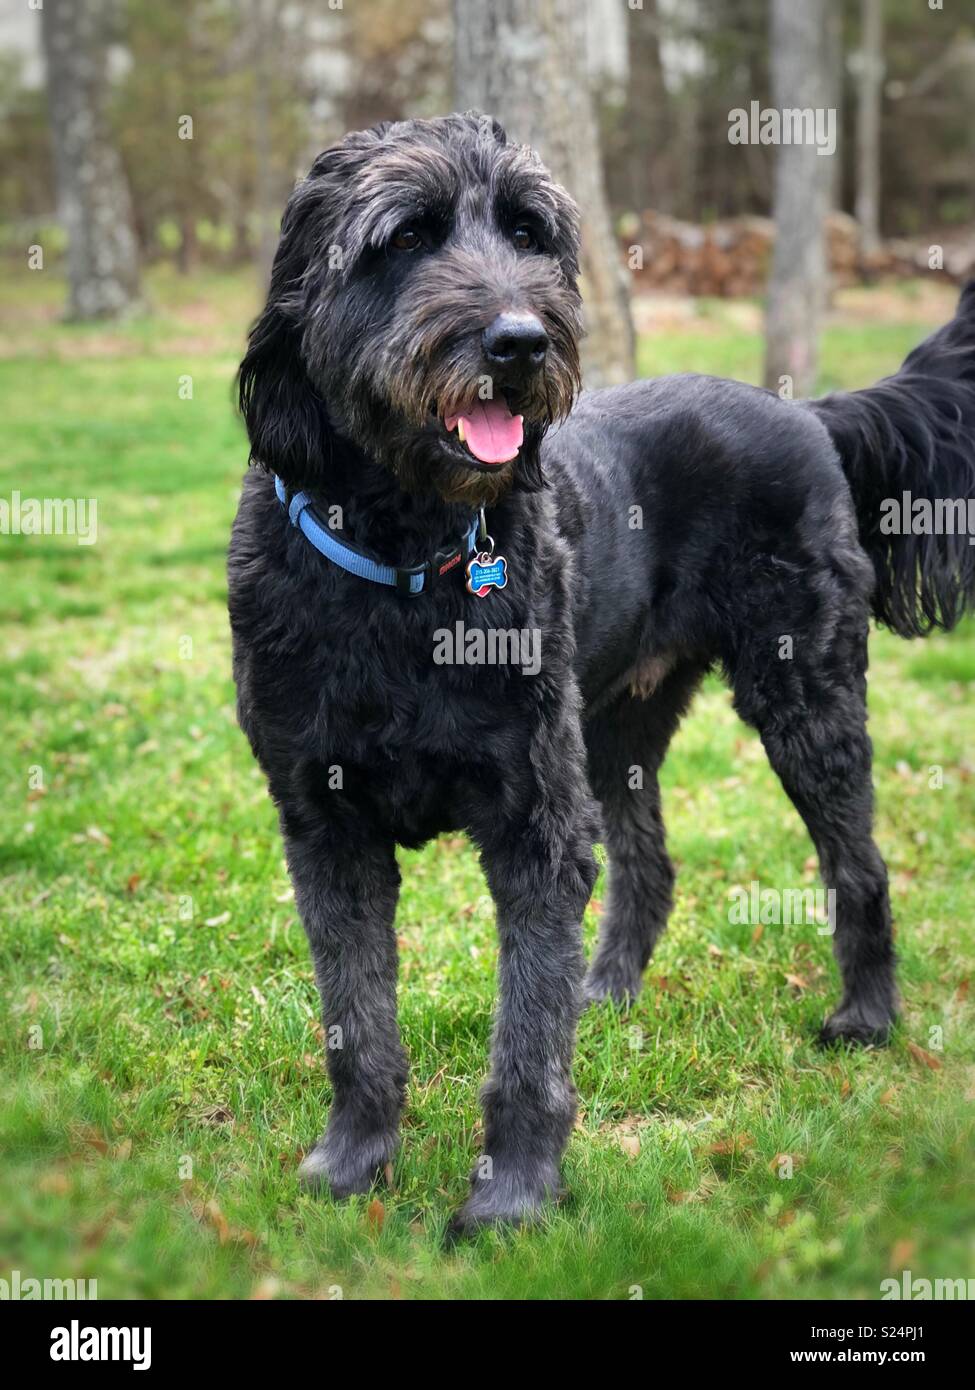 Black Australian Shepard Standard Mix “Aussie-doodle” adult male dog, standing, cute, medium thick hair, calm, in grassy field with trees Stock Photo - Alamy